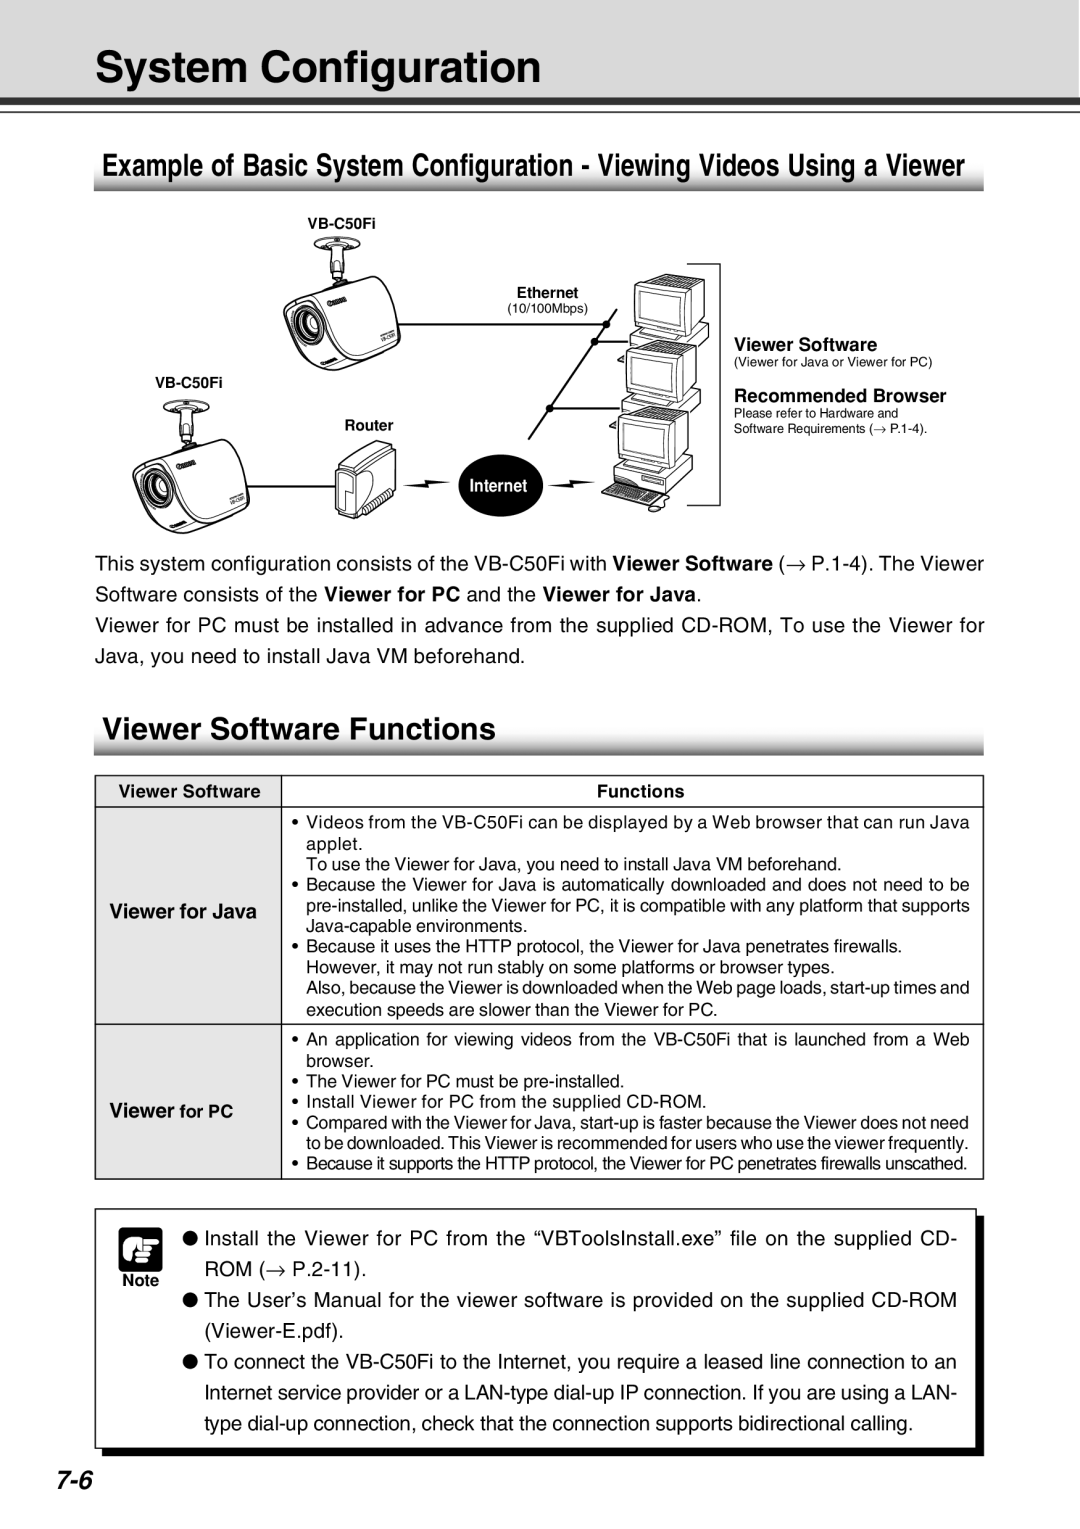 Canon Vb-C50fi user manual System Configuration, Viewer Software Functions, Viewer for Java, Viewer for PC 